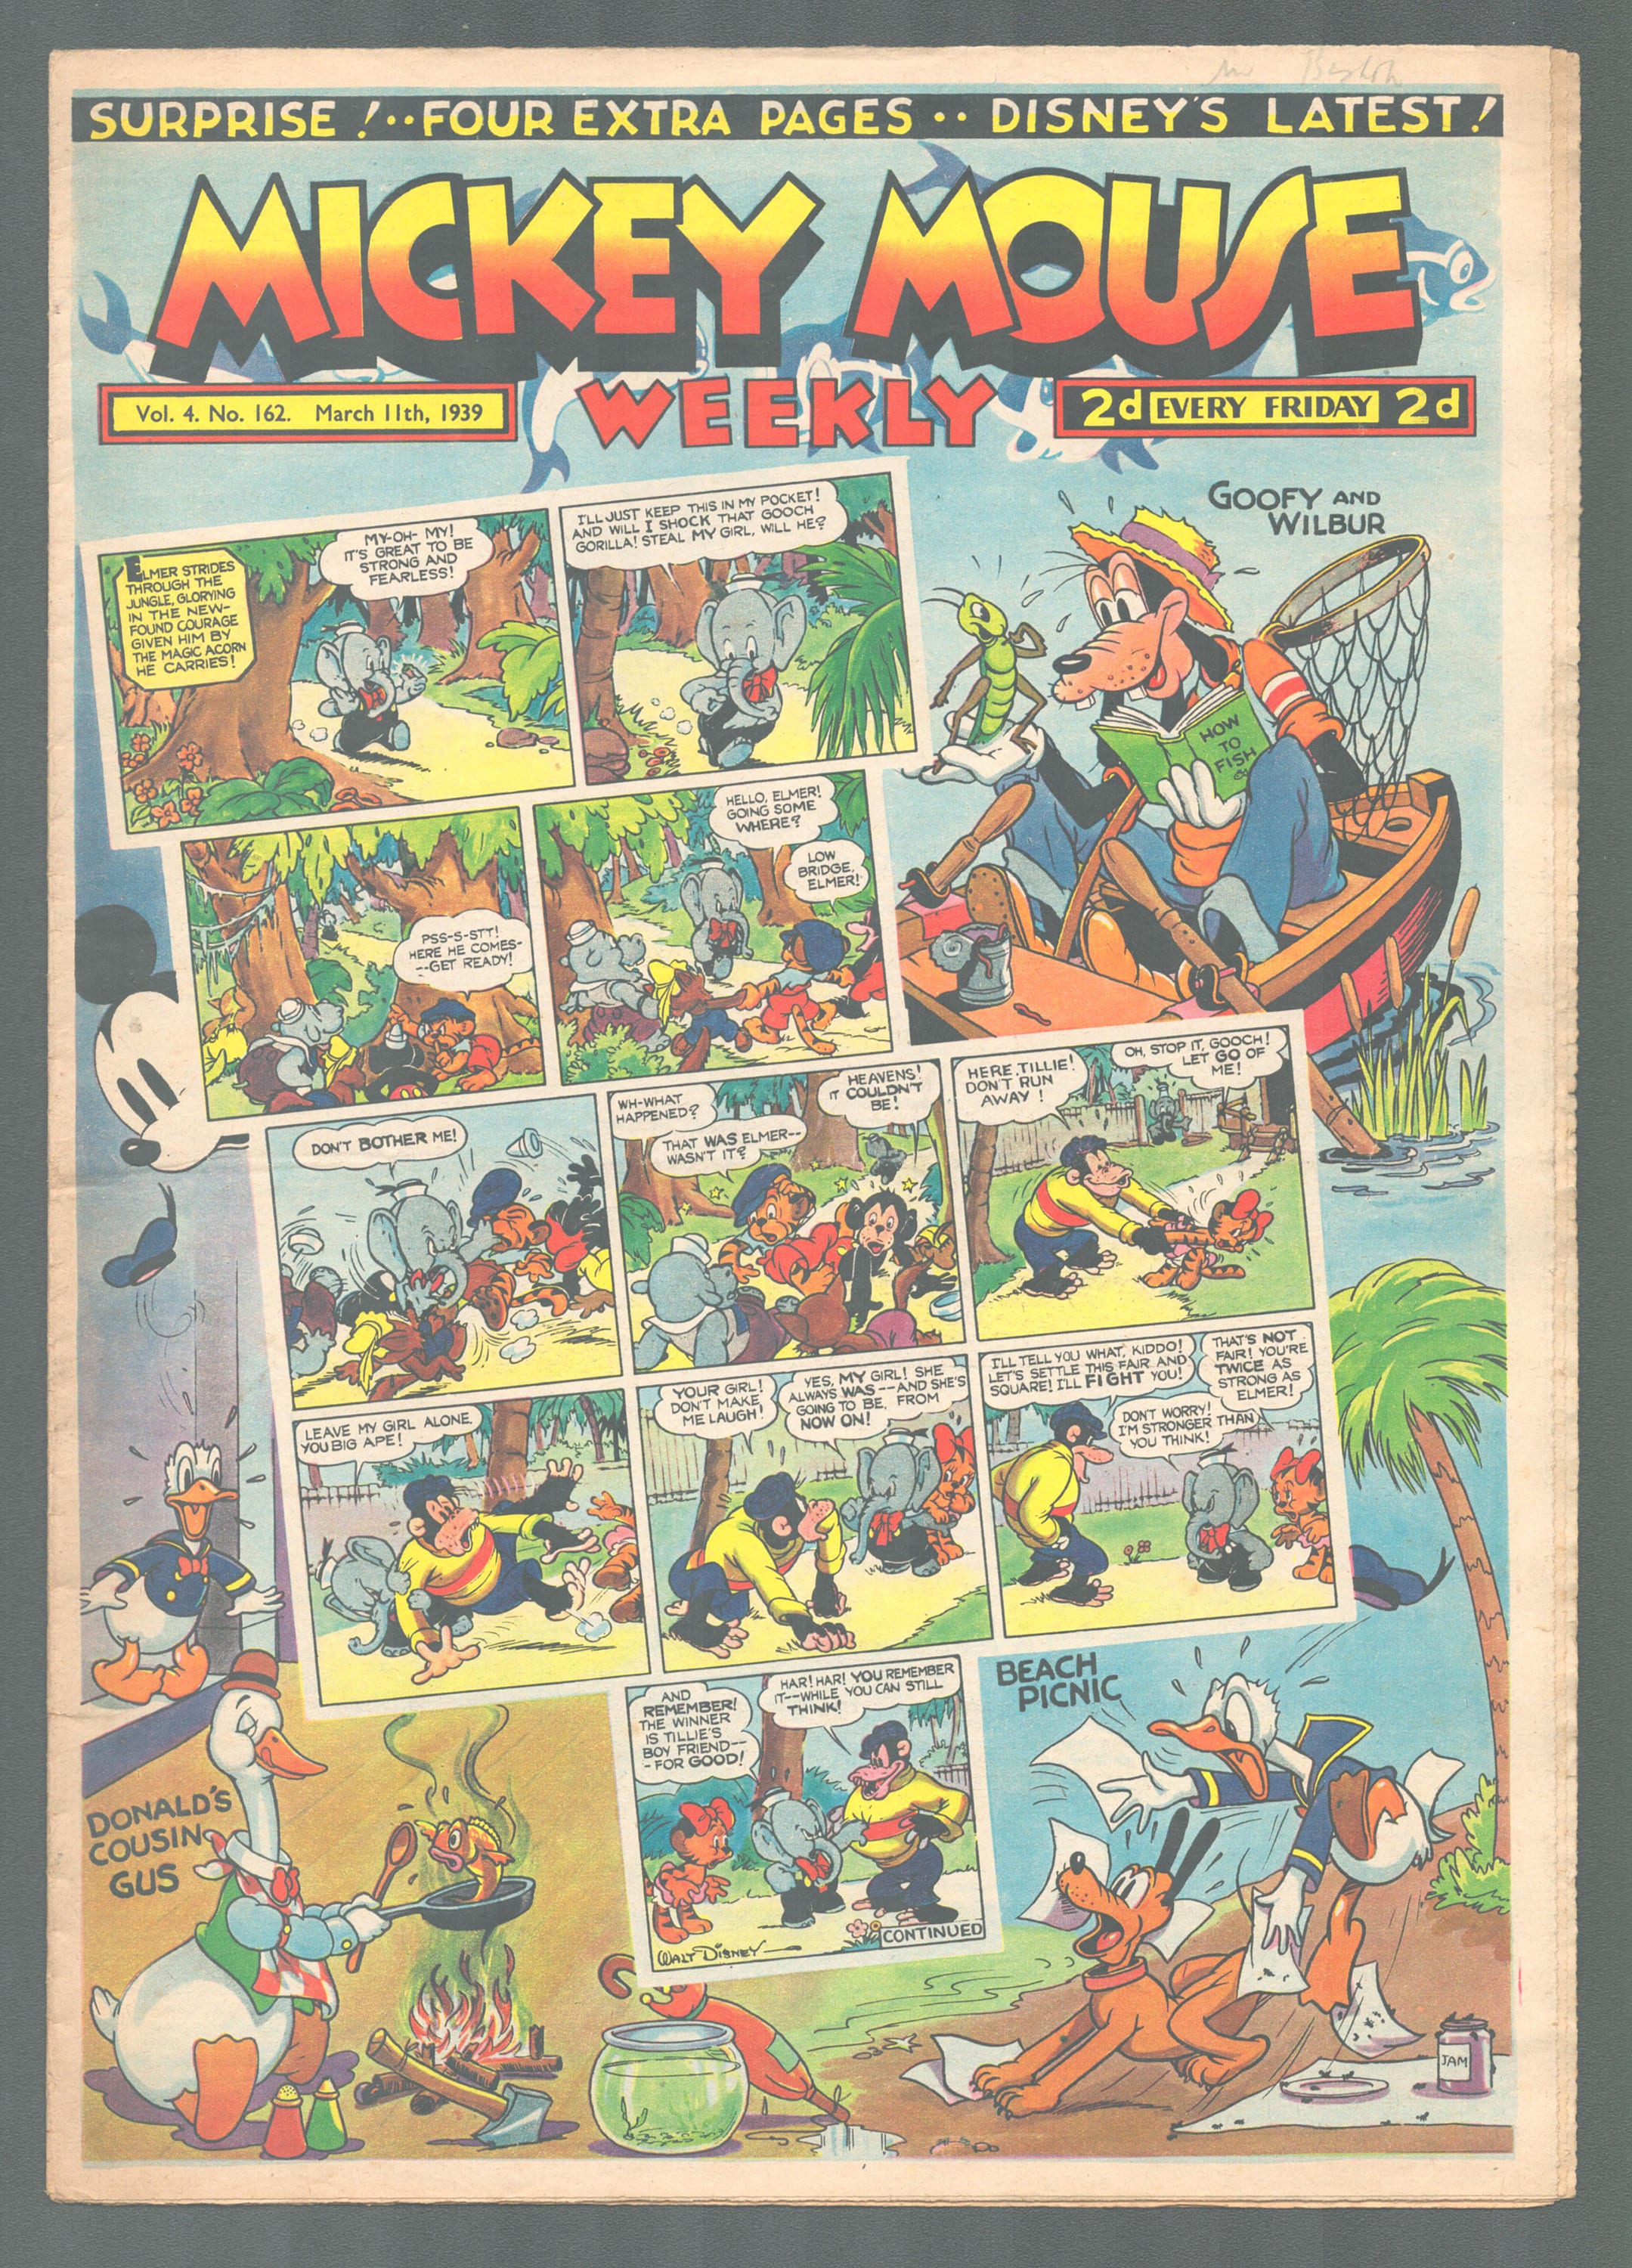 Mickey Mouse Weekly Vol 4 No 162 March 11 1939 UK Comic DISNEY